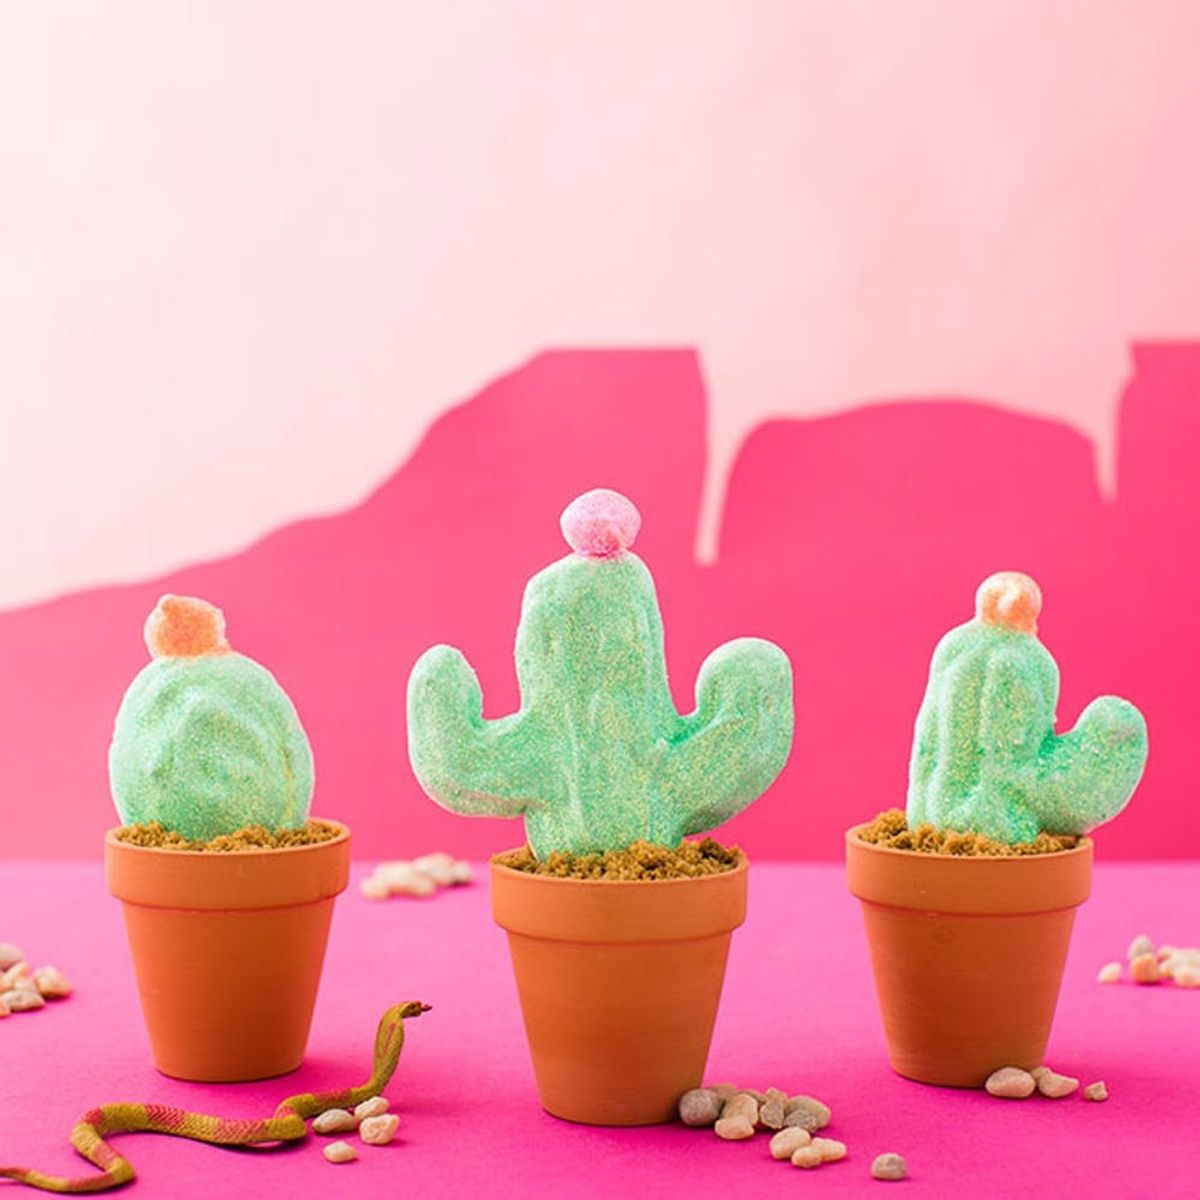 How to Make DIY Cactus Peeps for Easter